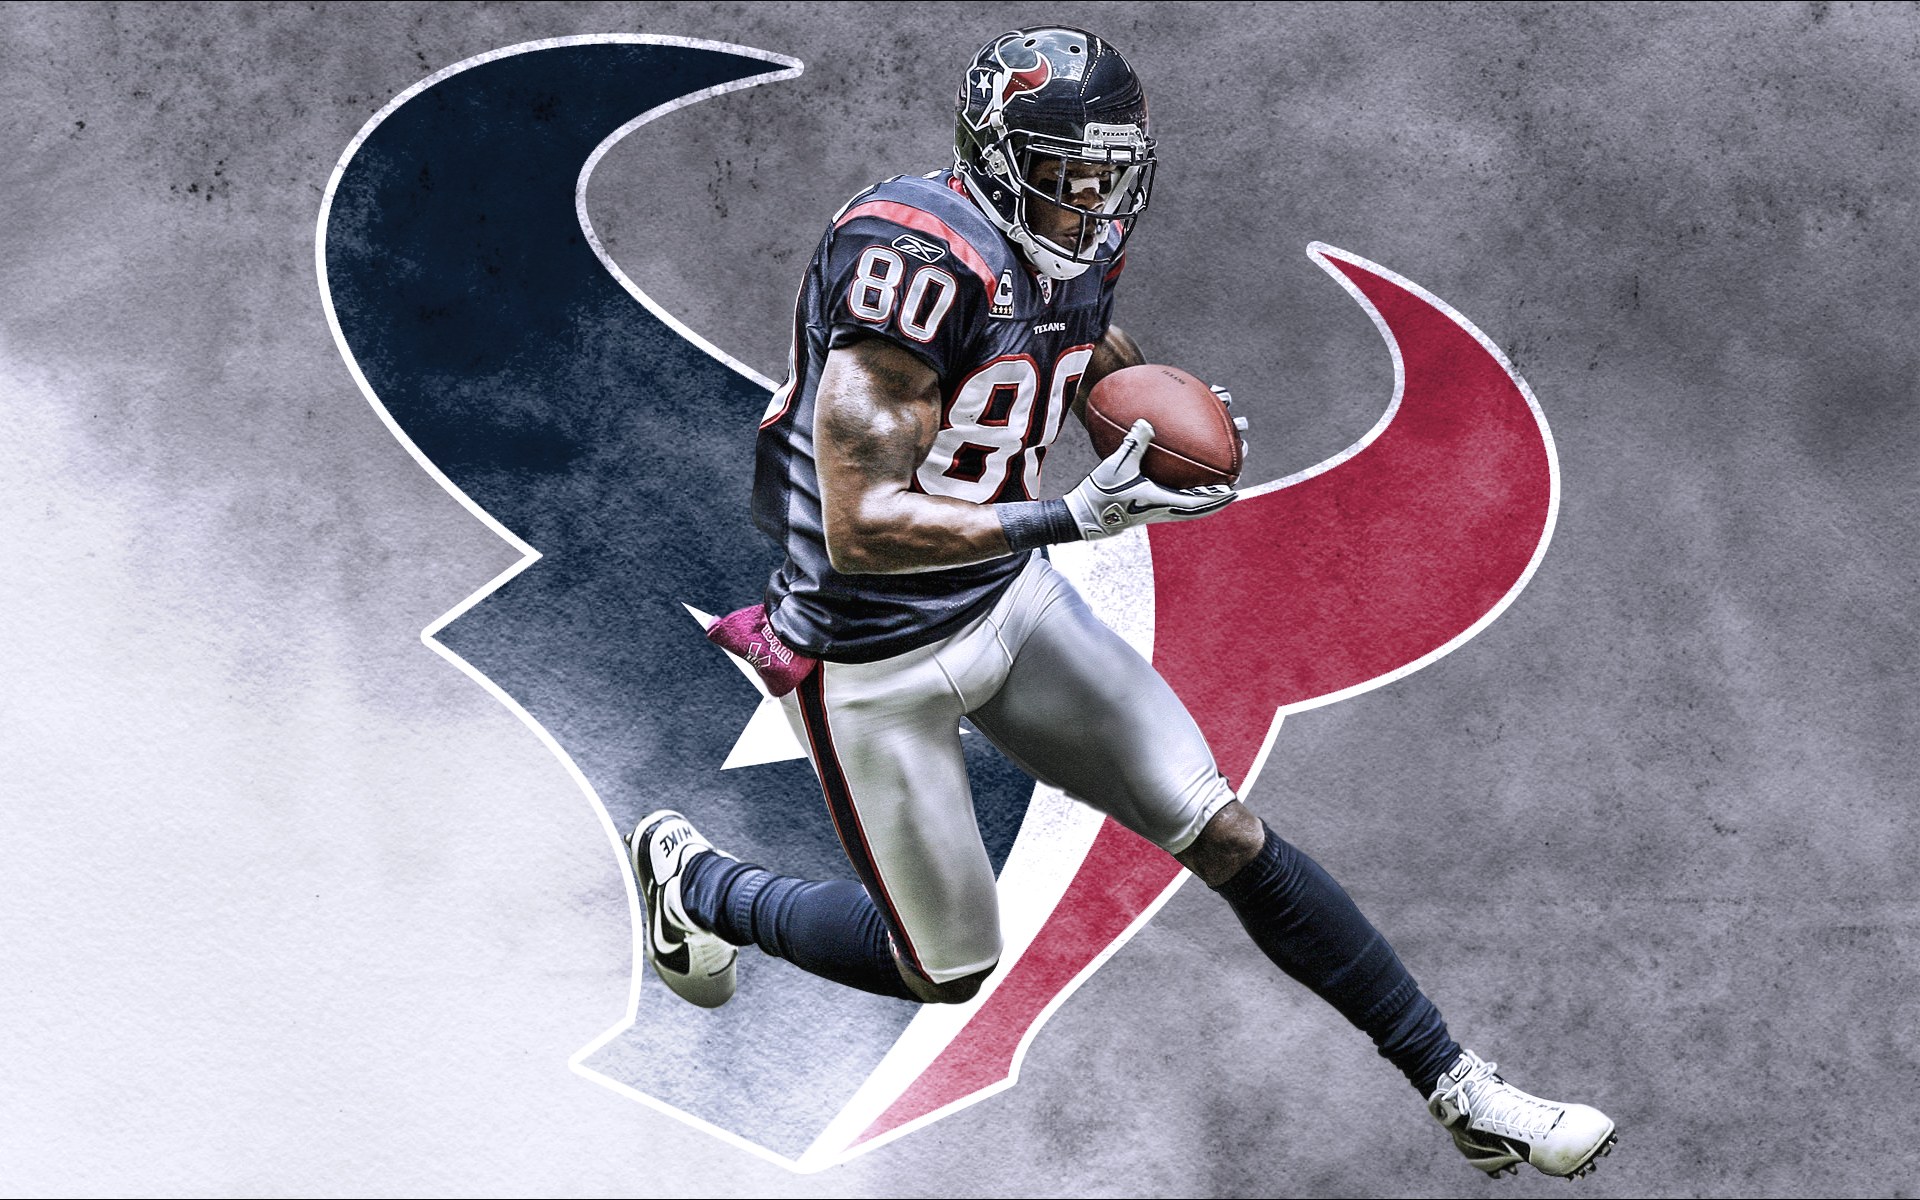 NFL Hoston Texans Logo And Andre Johnson 1920x1200 WIDE NFL ...